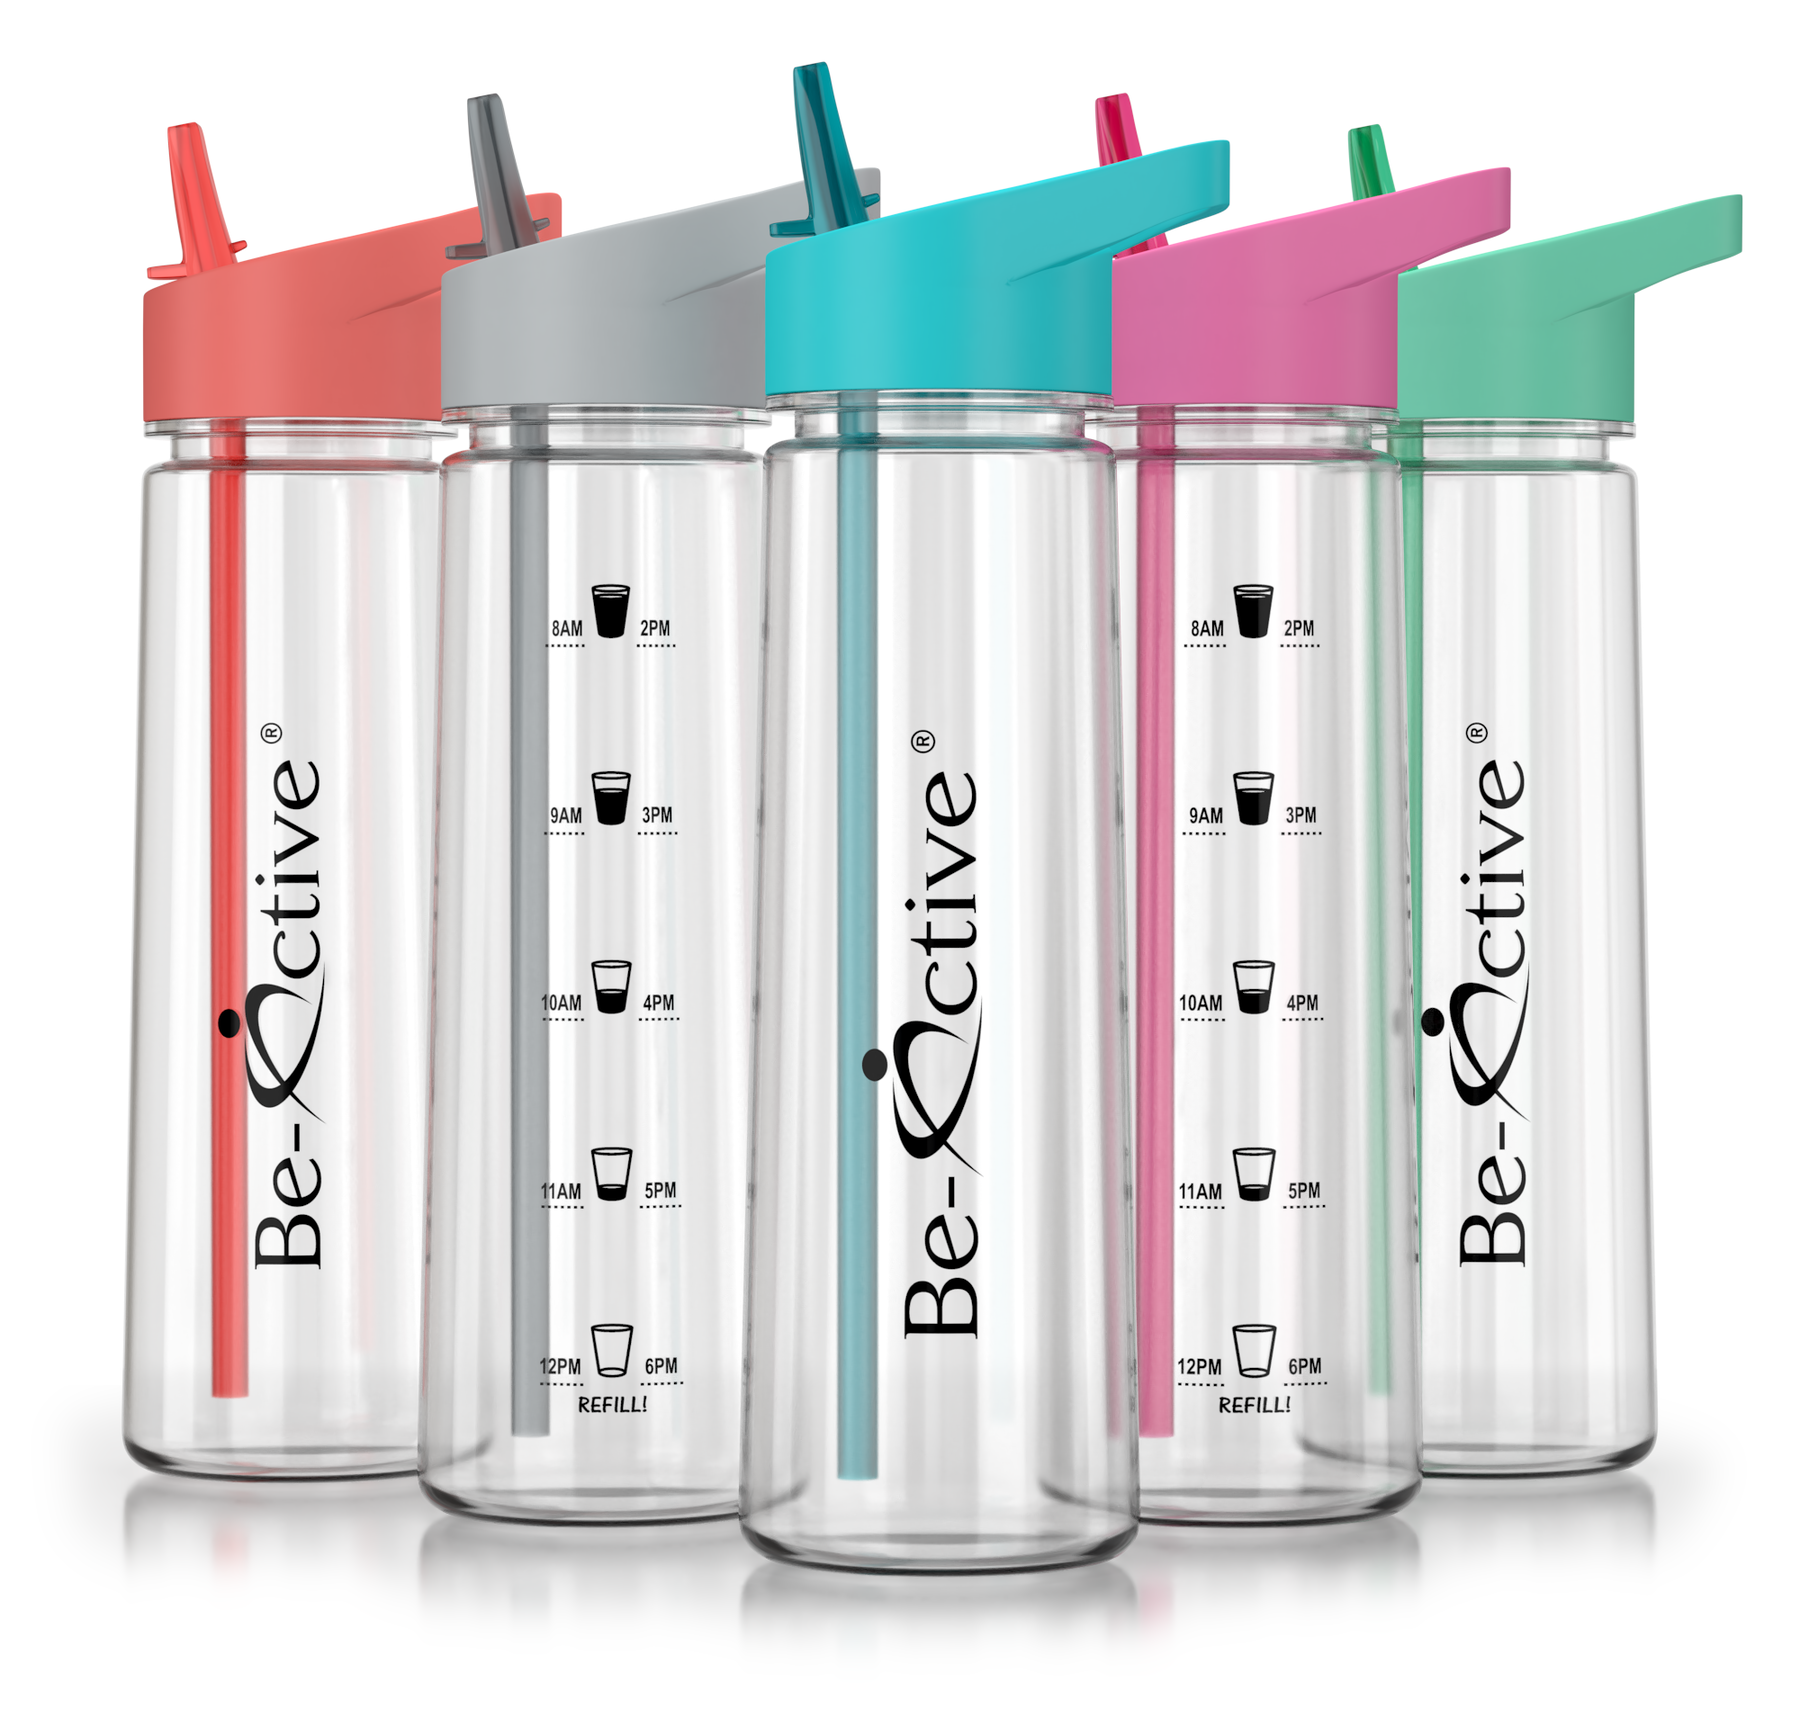 HYDRATE 900ml Water Bottle with Straw and Motivational Time Markings, Black